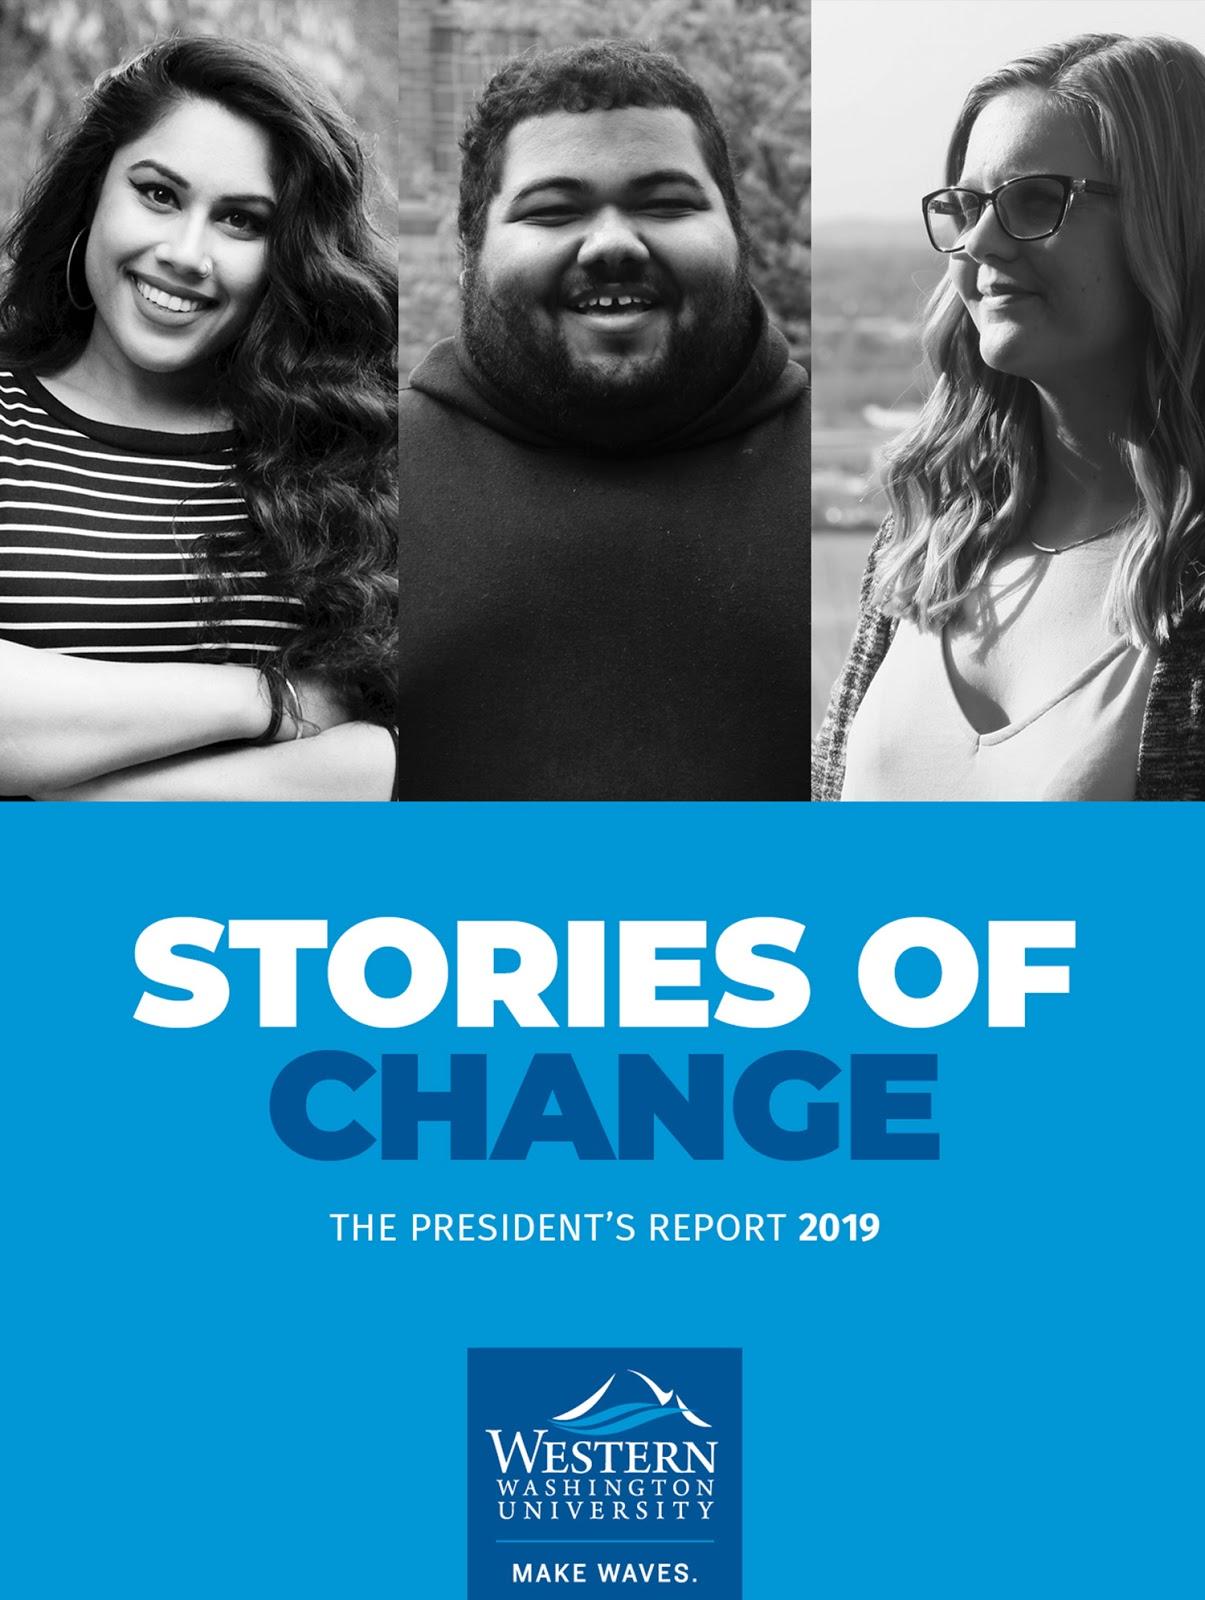 Three black and white student portraits with text "Stories of Change, the President's Report 2019"